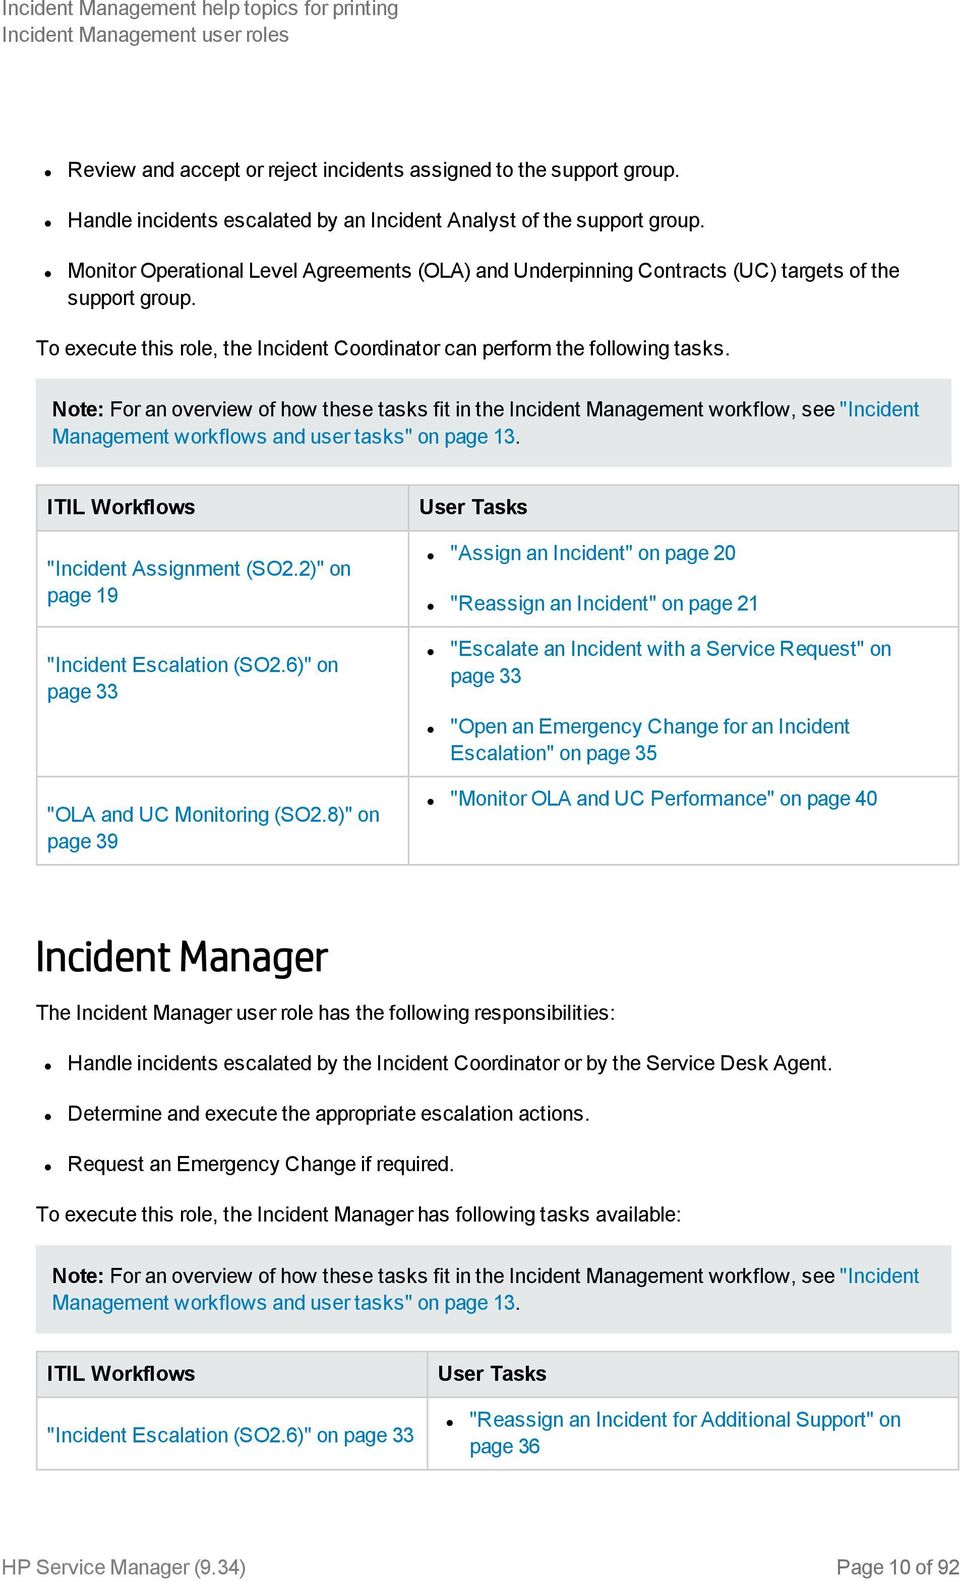 Note: For an overview of how these tasks fit in the Incident Management workflow, see "Incident Management workflows and user tasks" on page 13. ITIL Workflows "Incident Assignment (SO2.